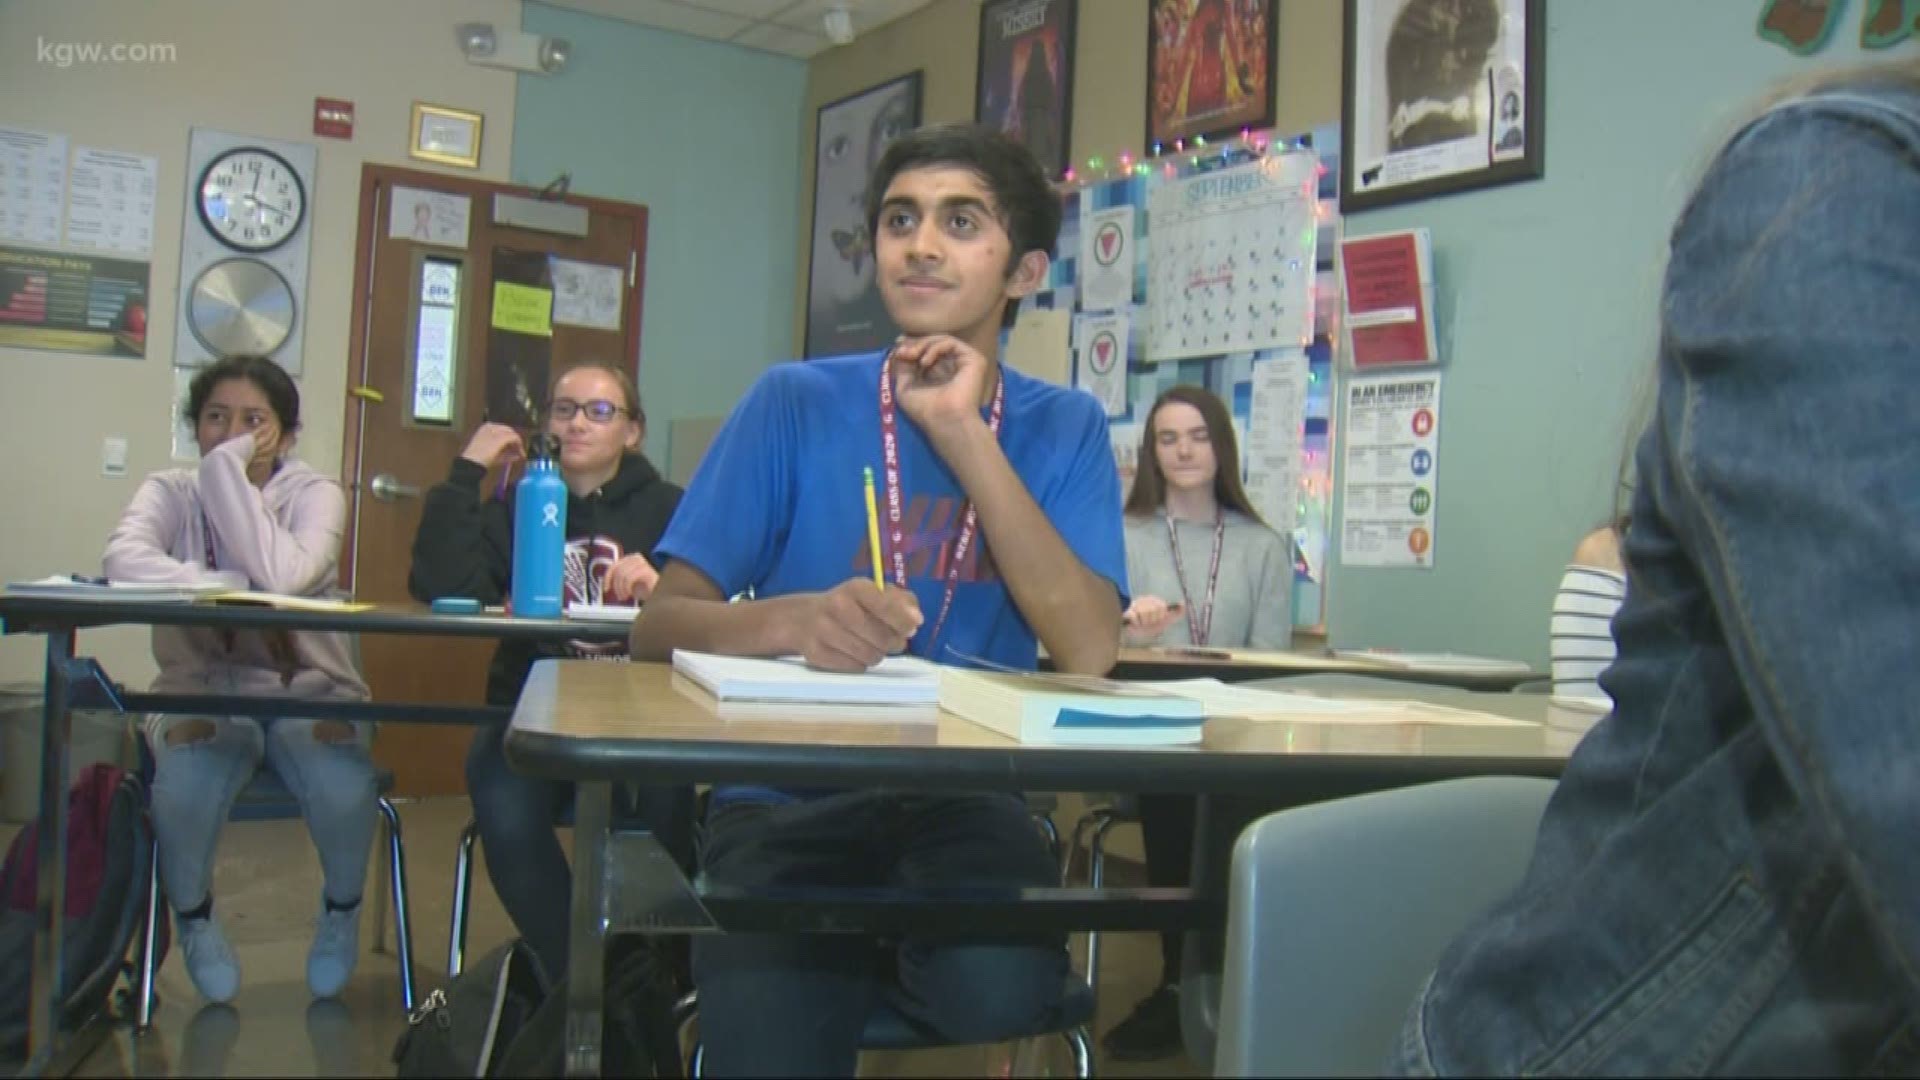 A students at Glencoe High School not only aced his SAT, but the ACT as well.